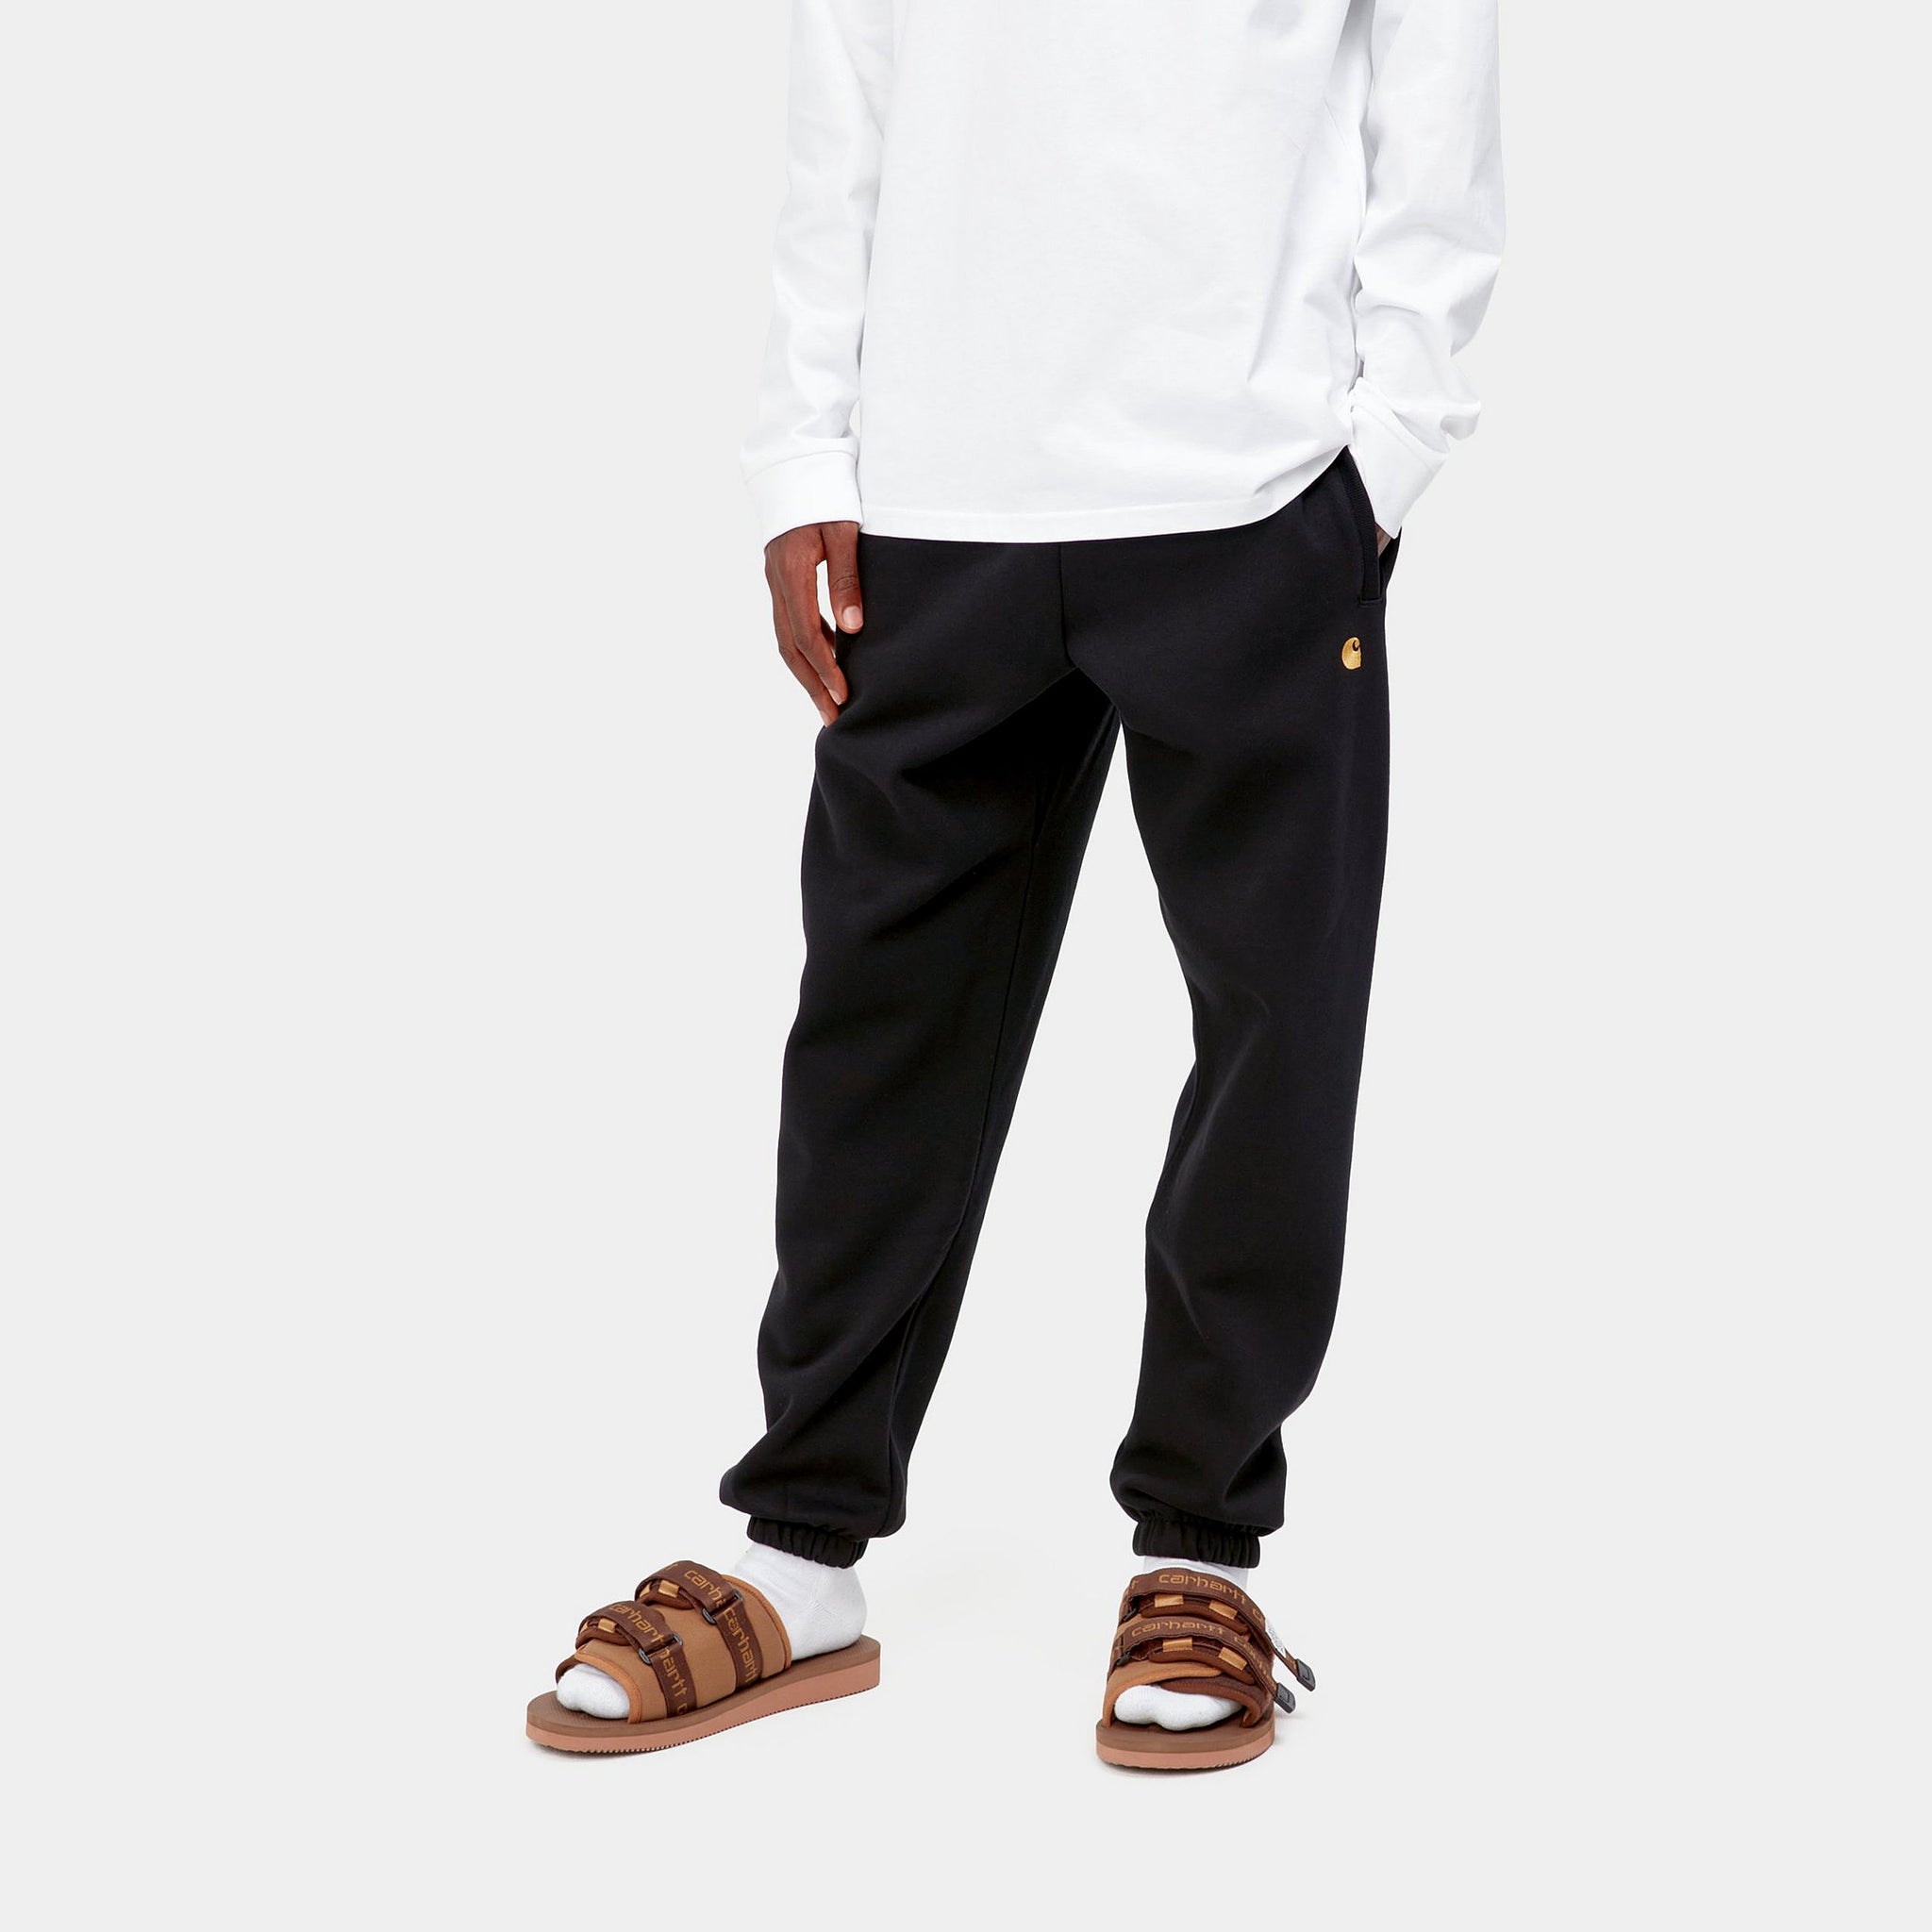 Carhartt WIP Chase Sweat Pant Black / Gold